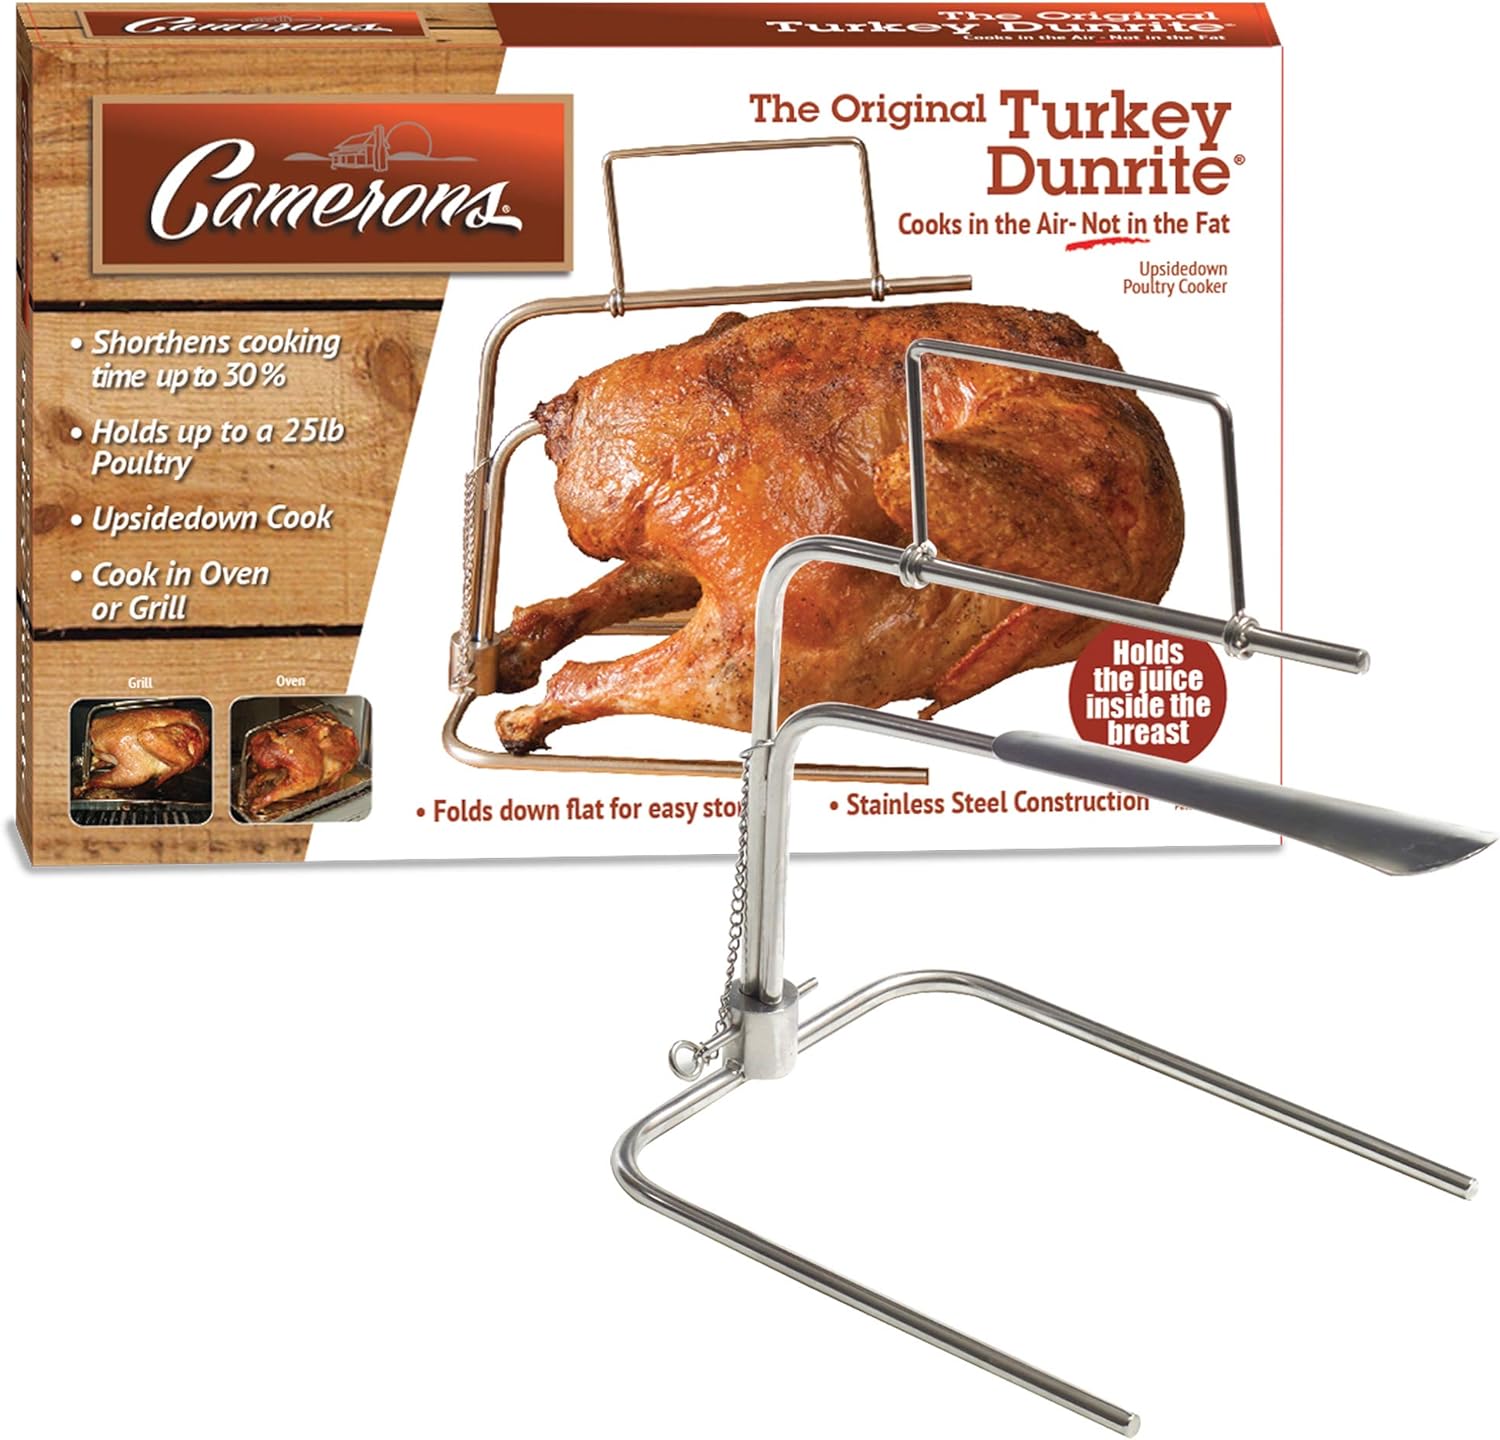 Cameron Cookware Turkey Roaster - Original Upside Down Turkey Dunrite  Stainless Steel Cooker - Keeps Juices Inside Meat, Not Outside the Pan, th